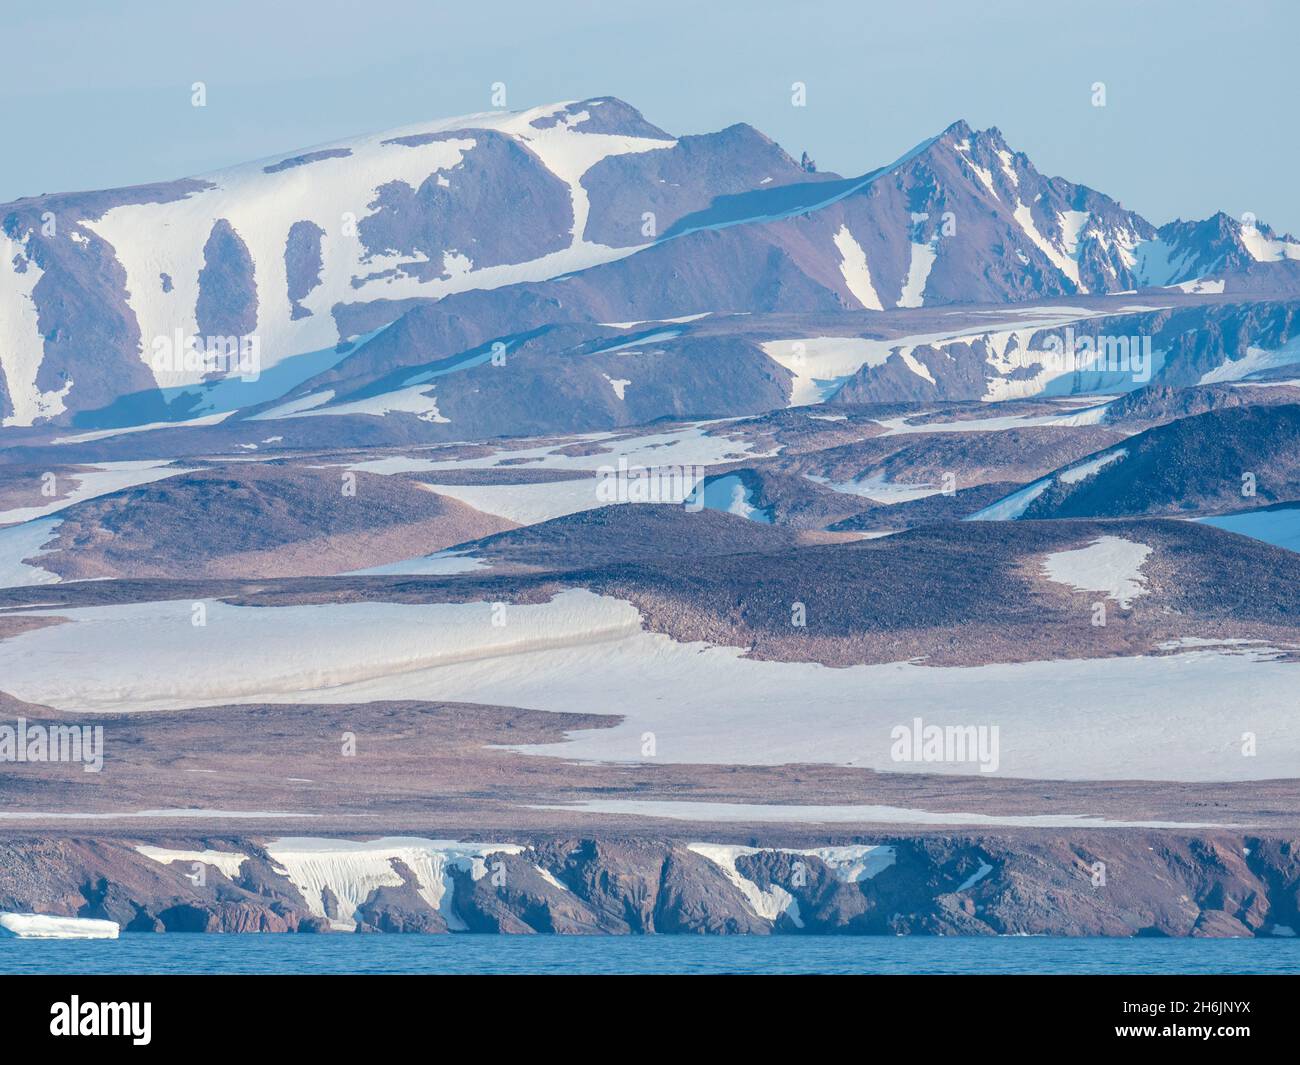 Snow covered mountains off the east coast of Greenland, Polar Regions Stock Photo